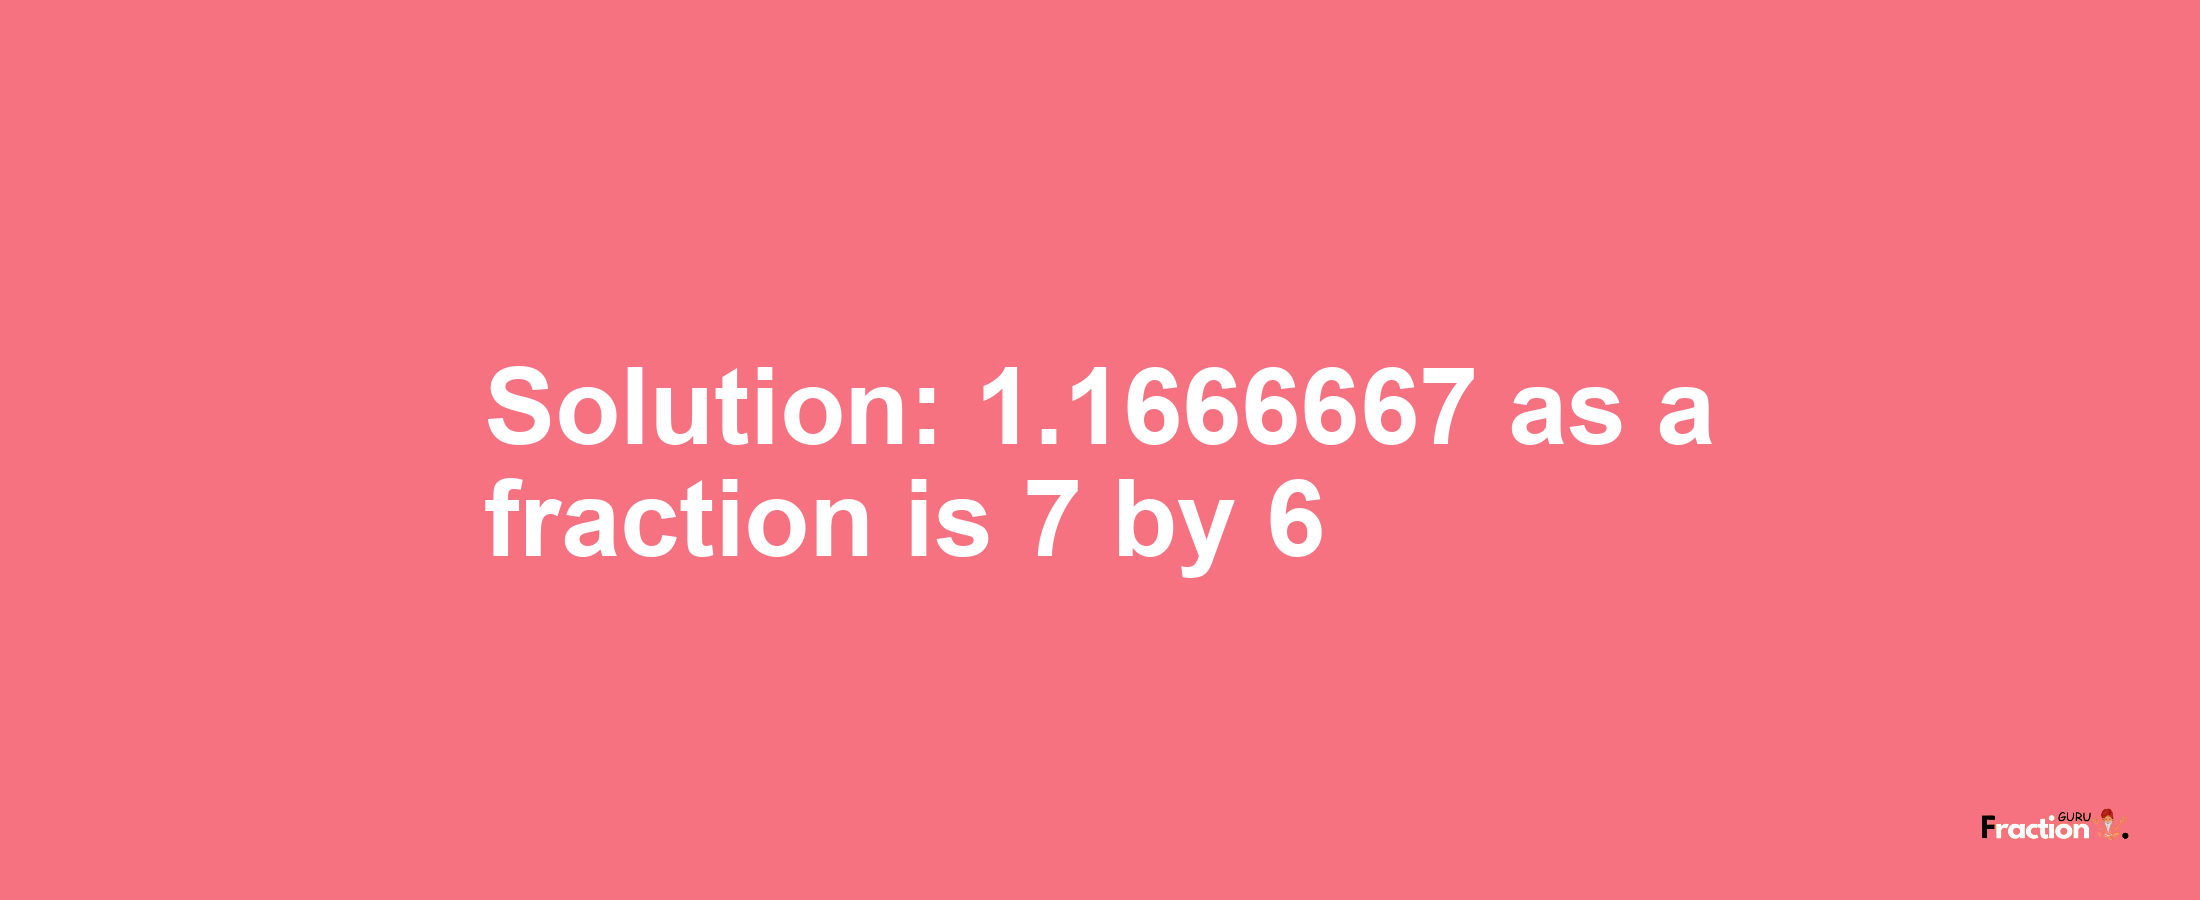 Solution:1.1666667 as a fraction is 7/6